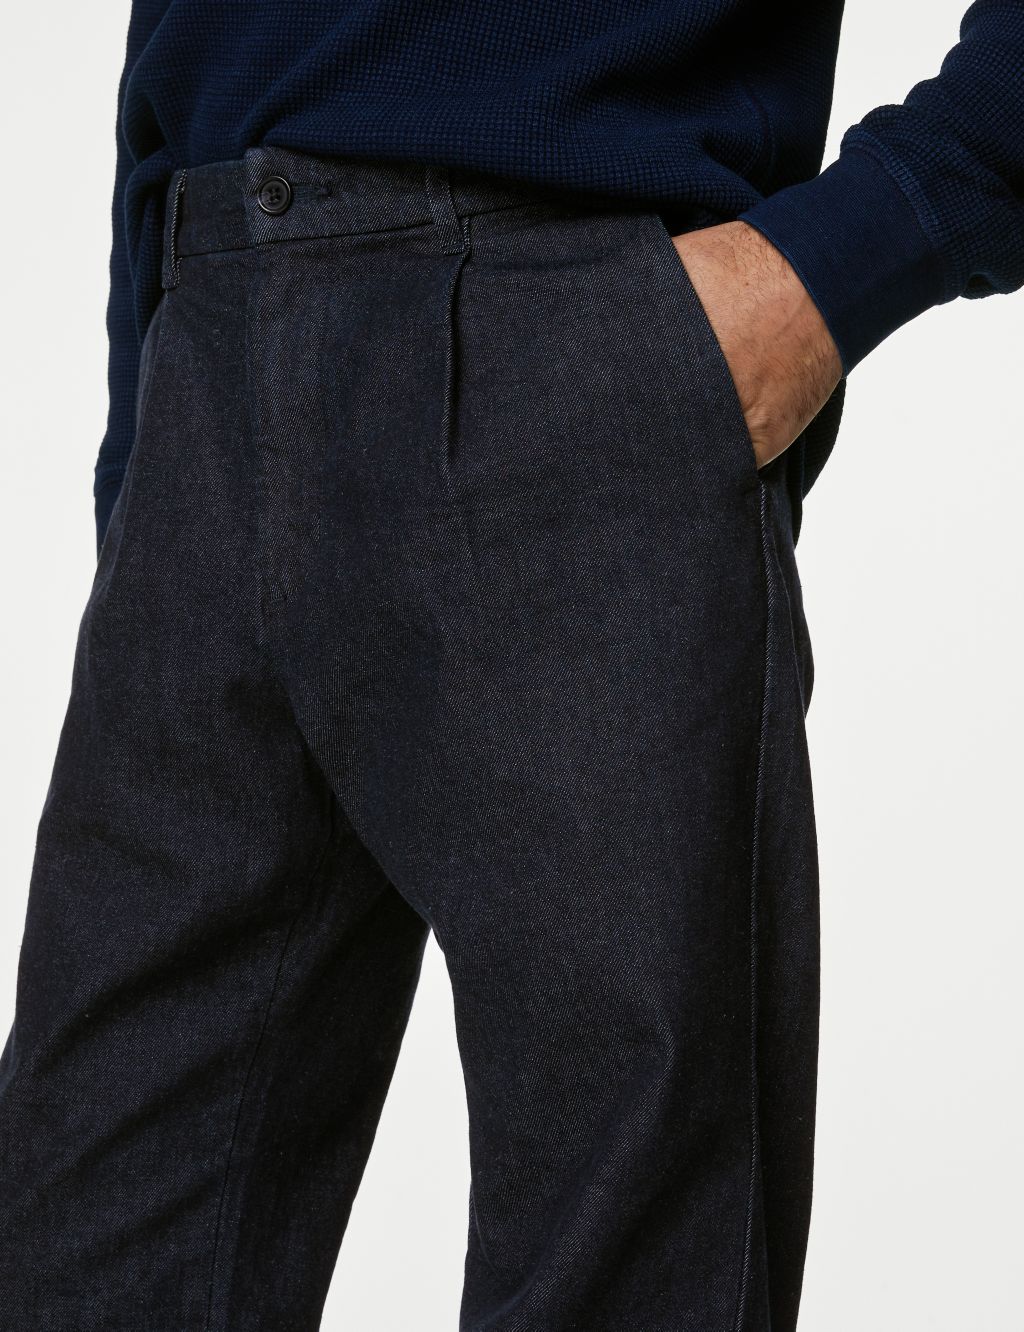 Relaxed Tapered Fit Single Pleat Jeans image 4